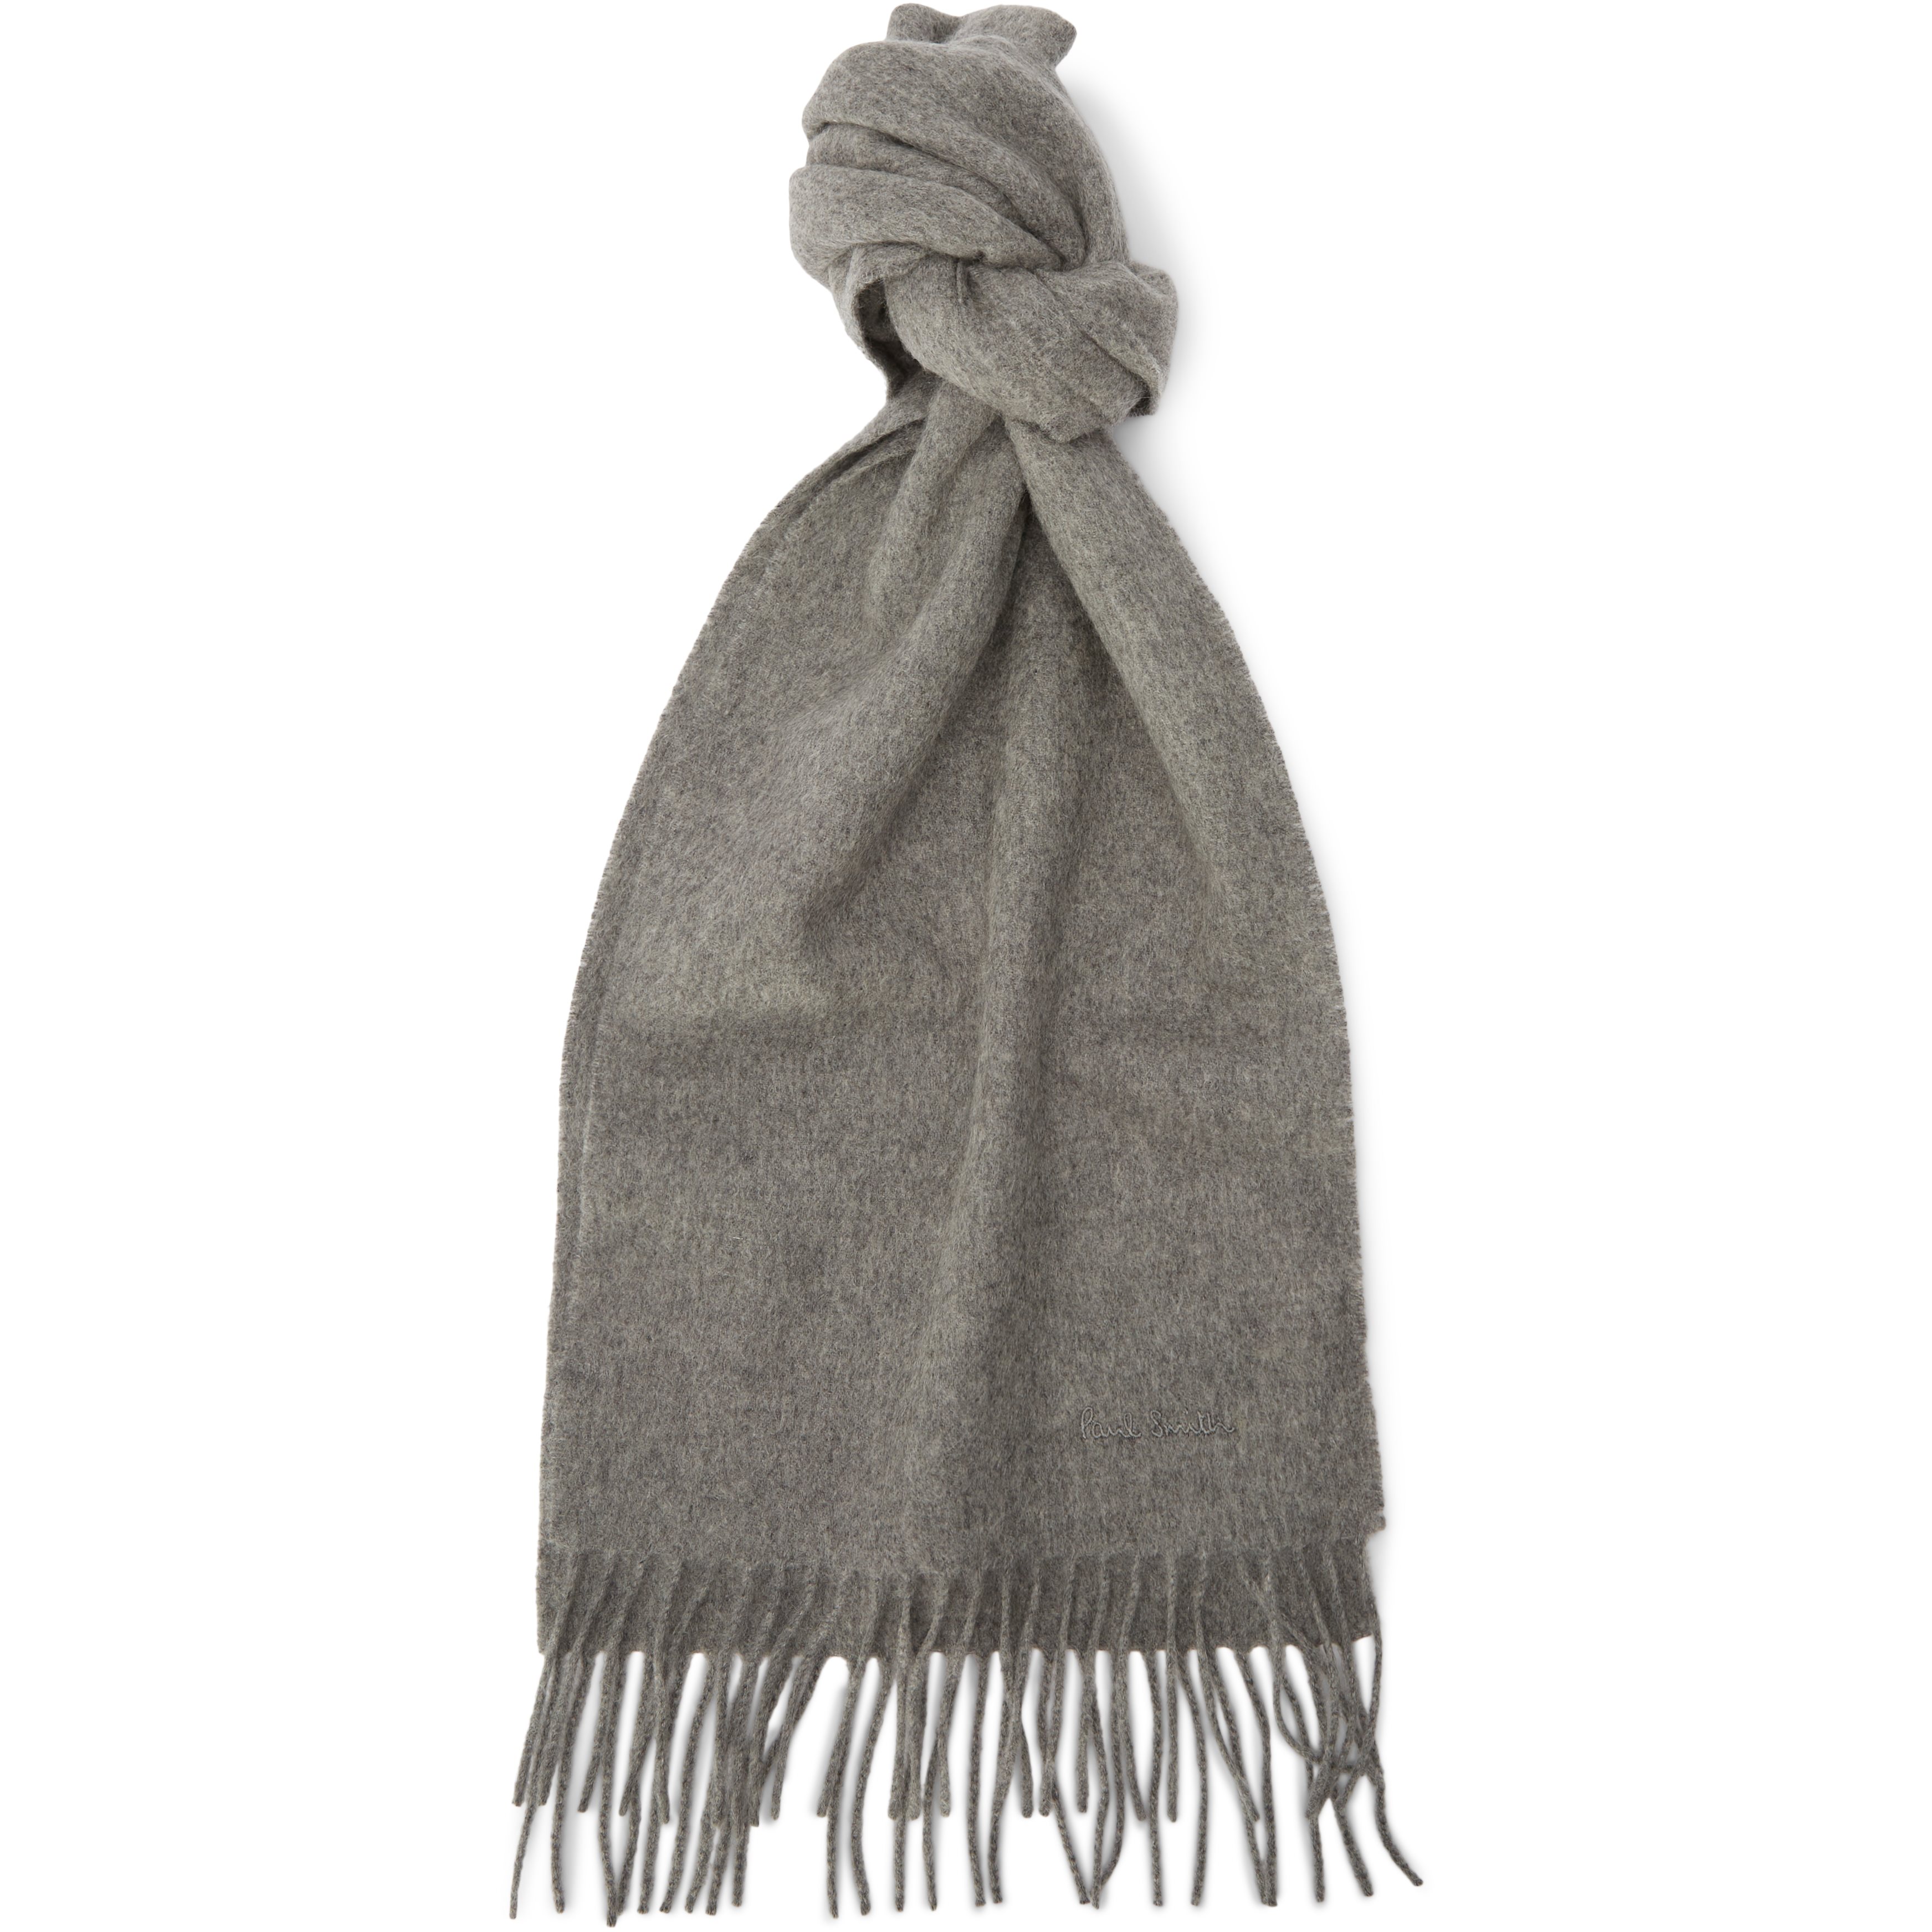 Paul Smith Accessories Scarves 119F AS09 CASHMERE Grey